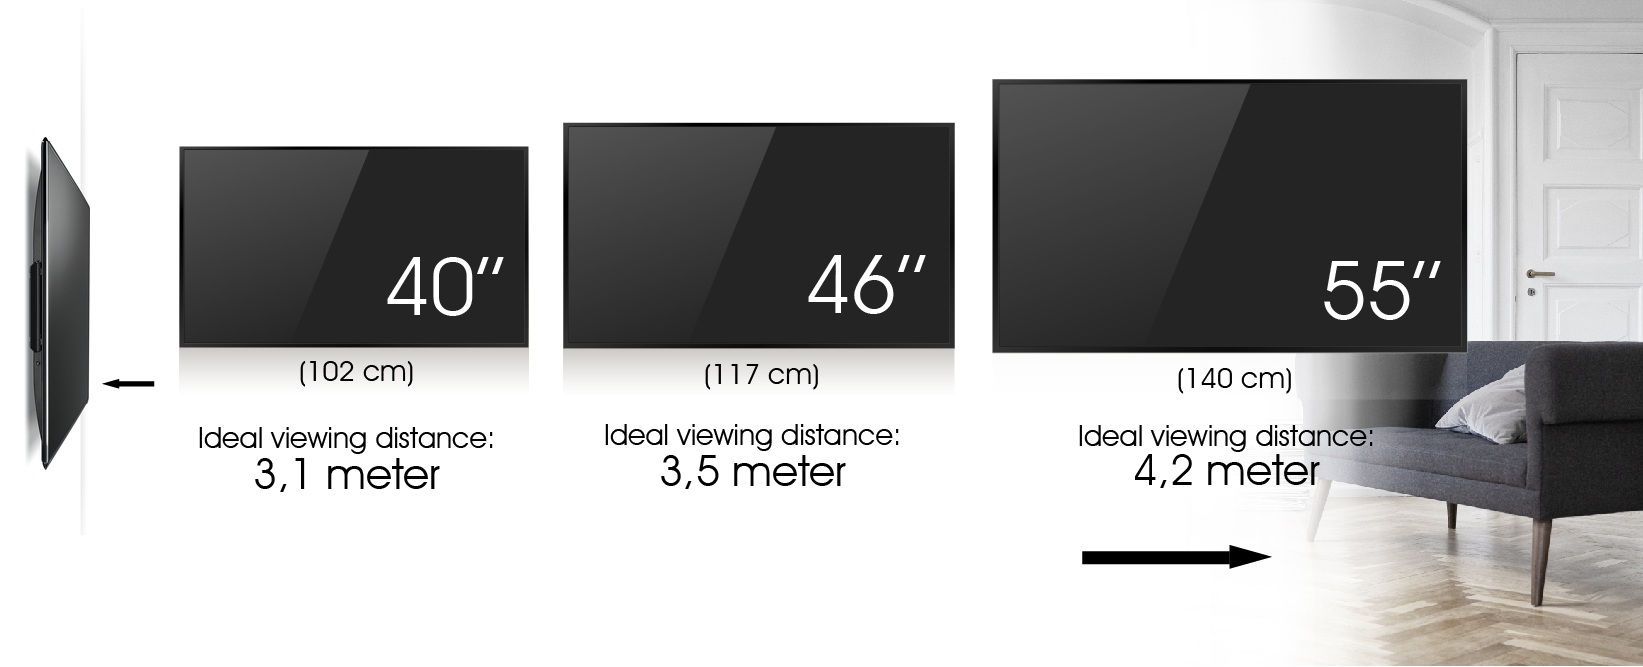 Ideal viewing distance | Vogel's